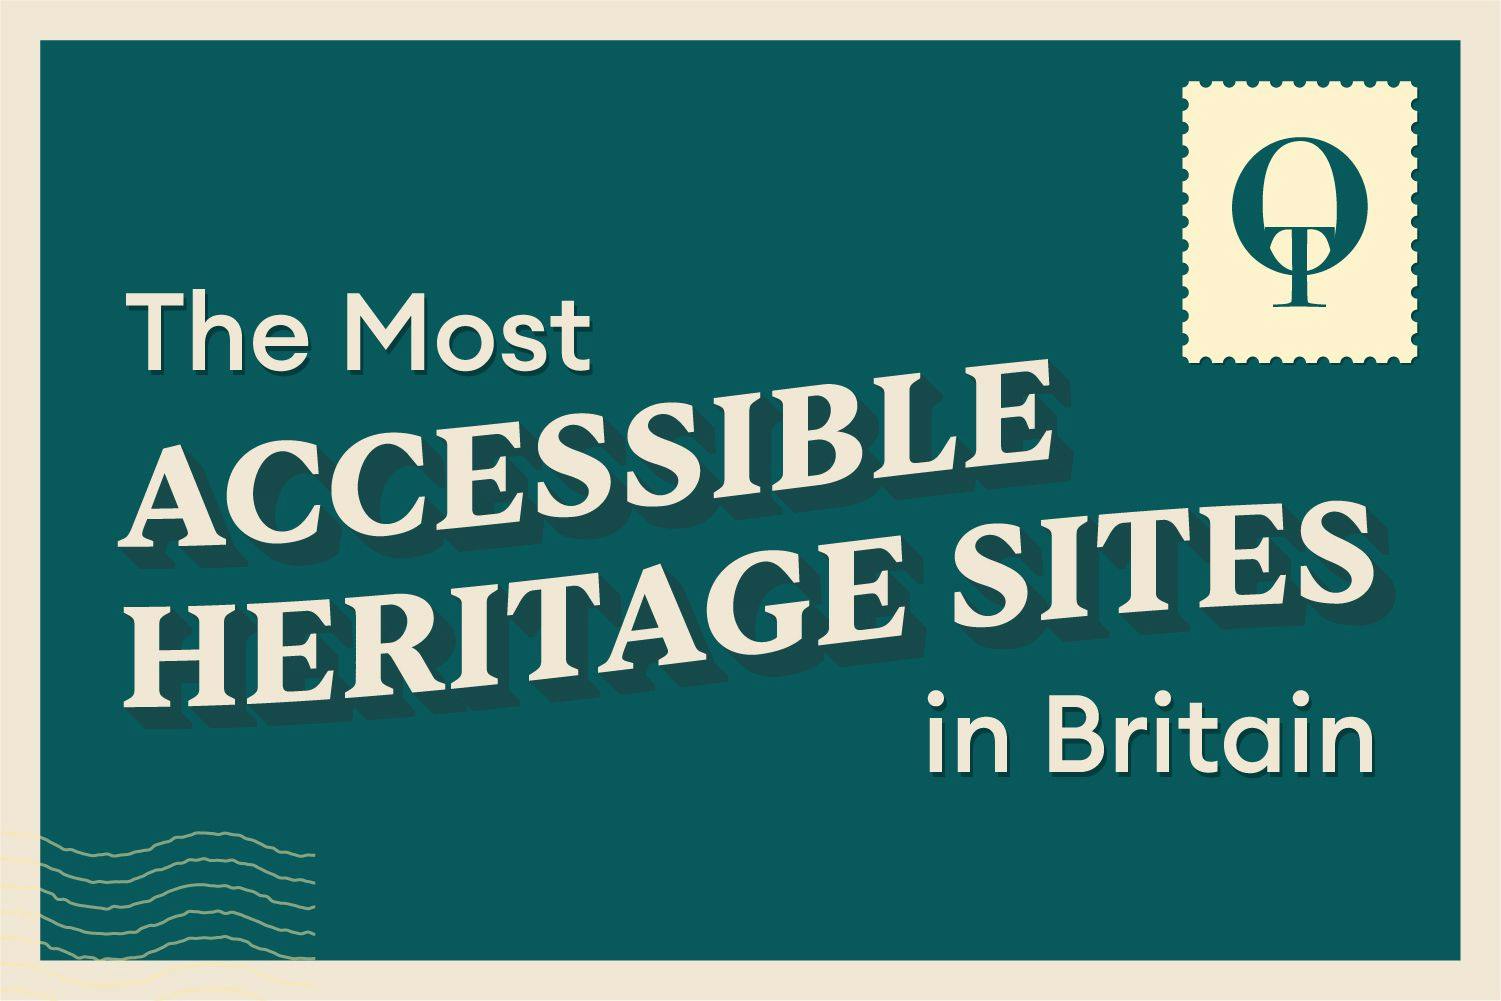 The Most Accessible Heritage Sites in Britain Title